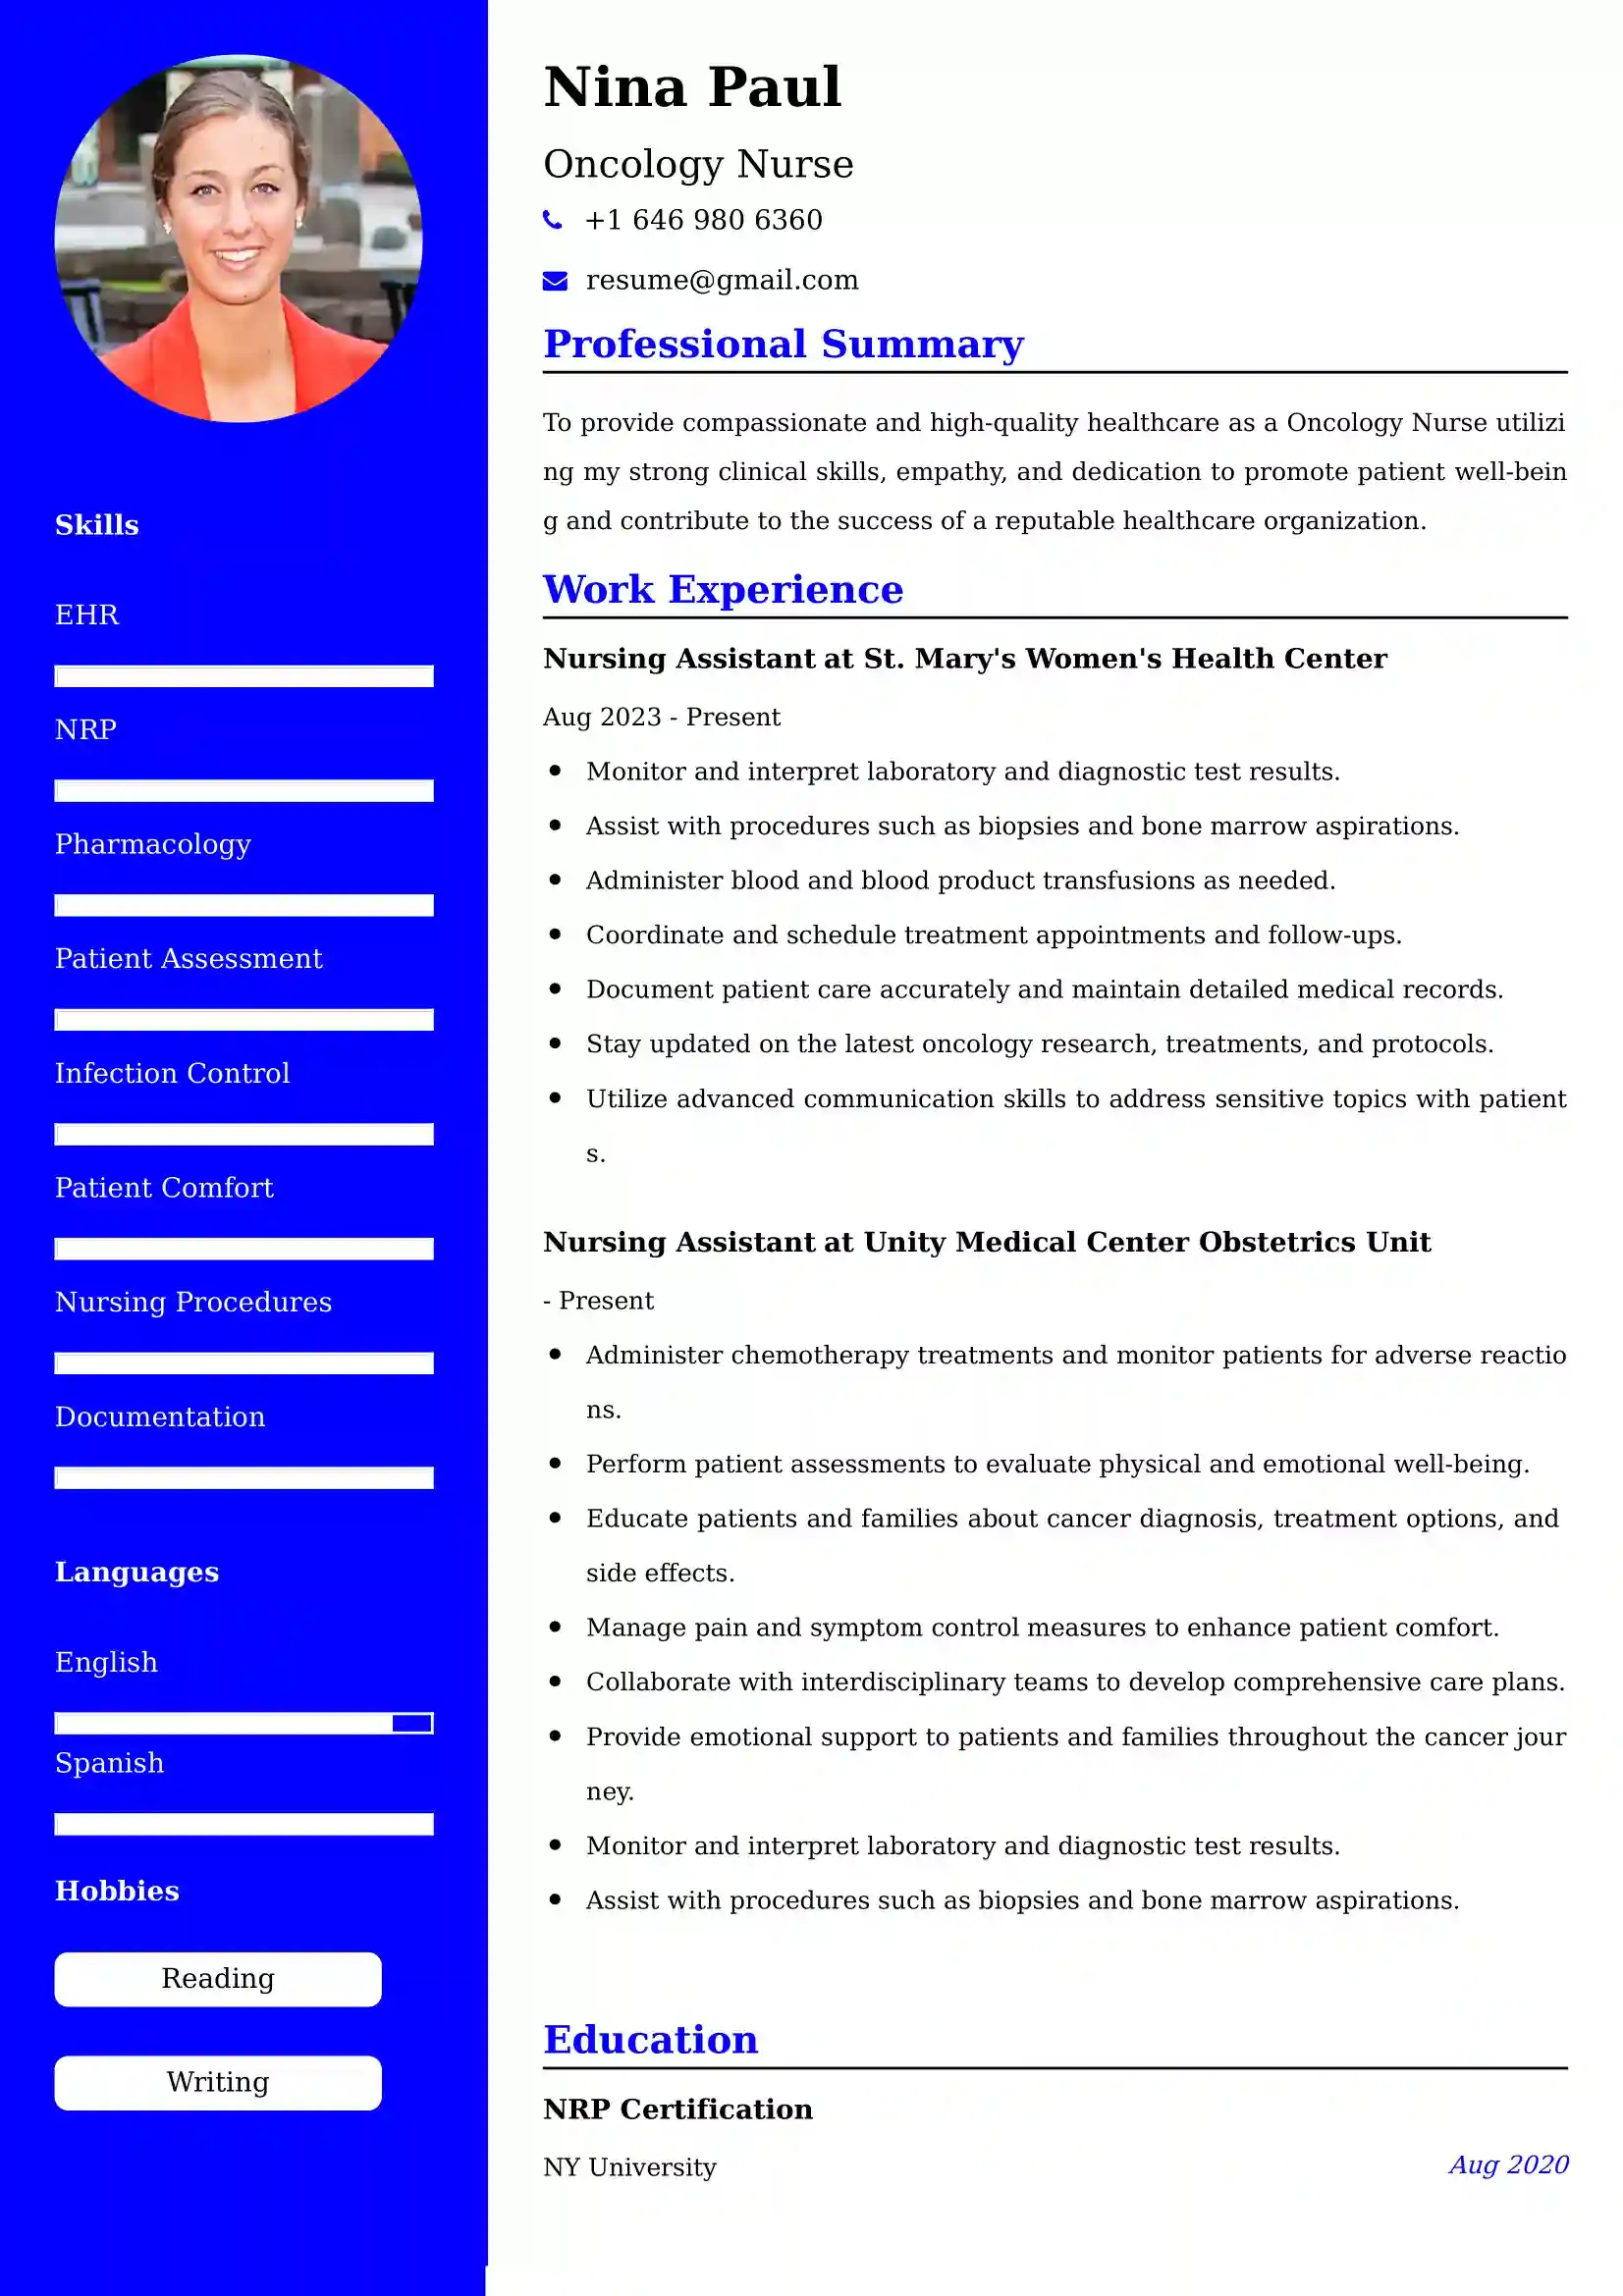 Oncology Nurse Resume Examples - UK Format, Latest Template.